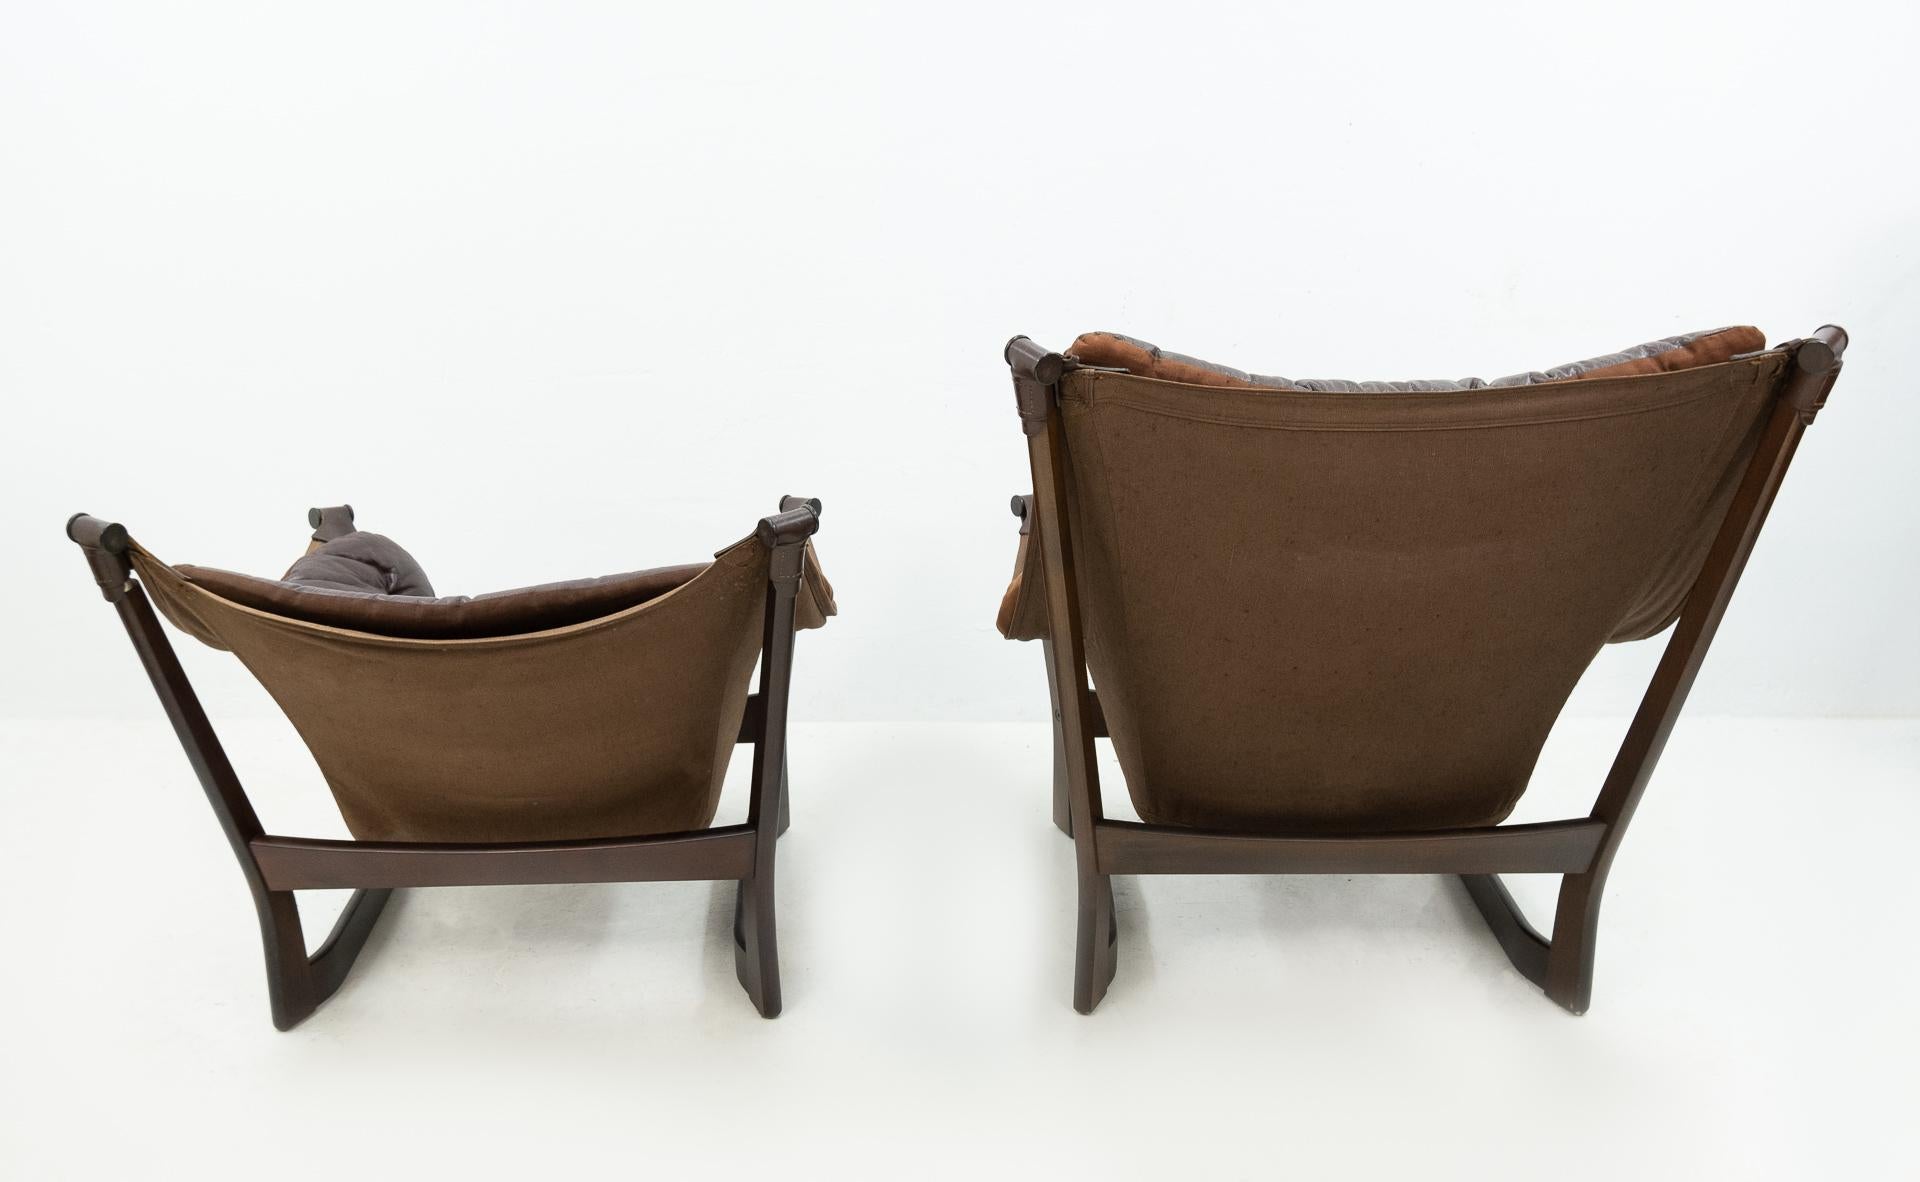 Norwegian Teak and Leather Pair of 'Trega' Chairs by Tormod Alnaes for Sørliemøbler